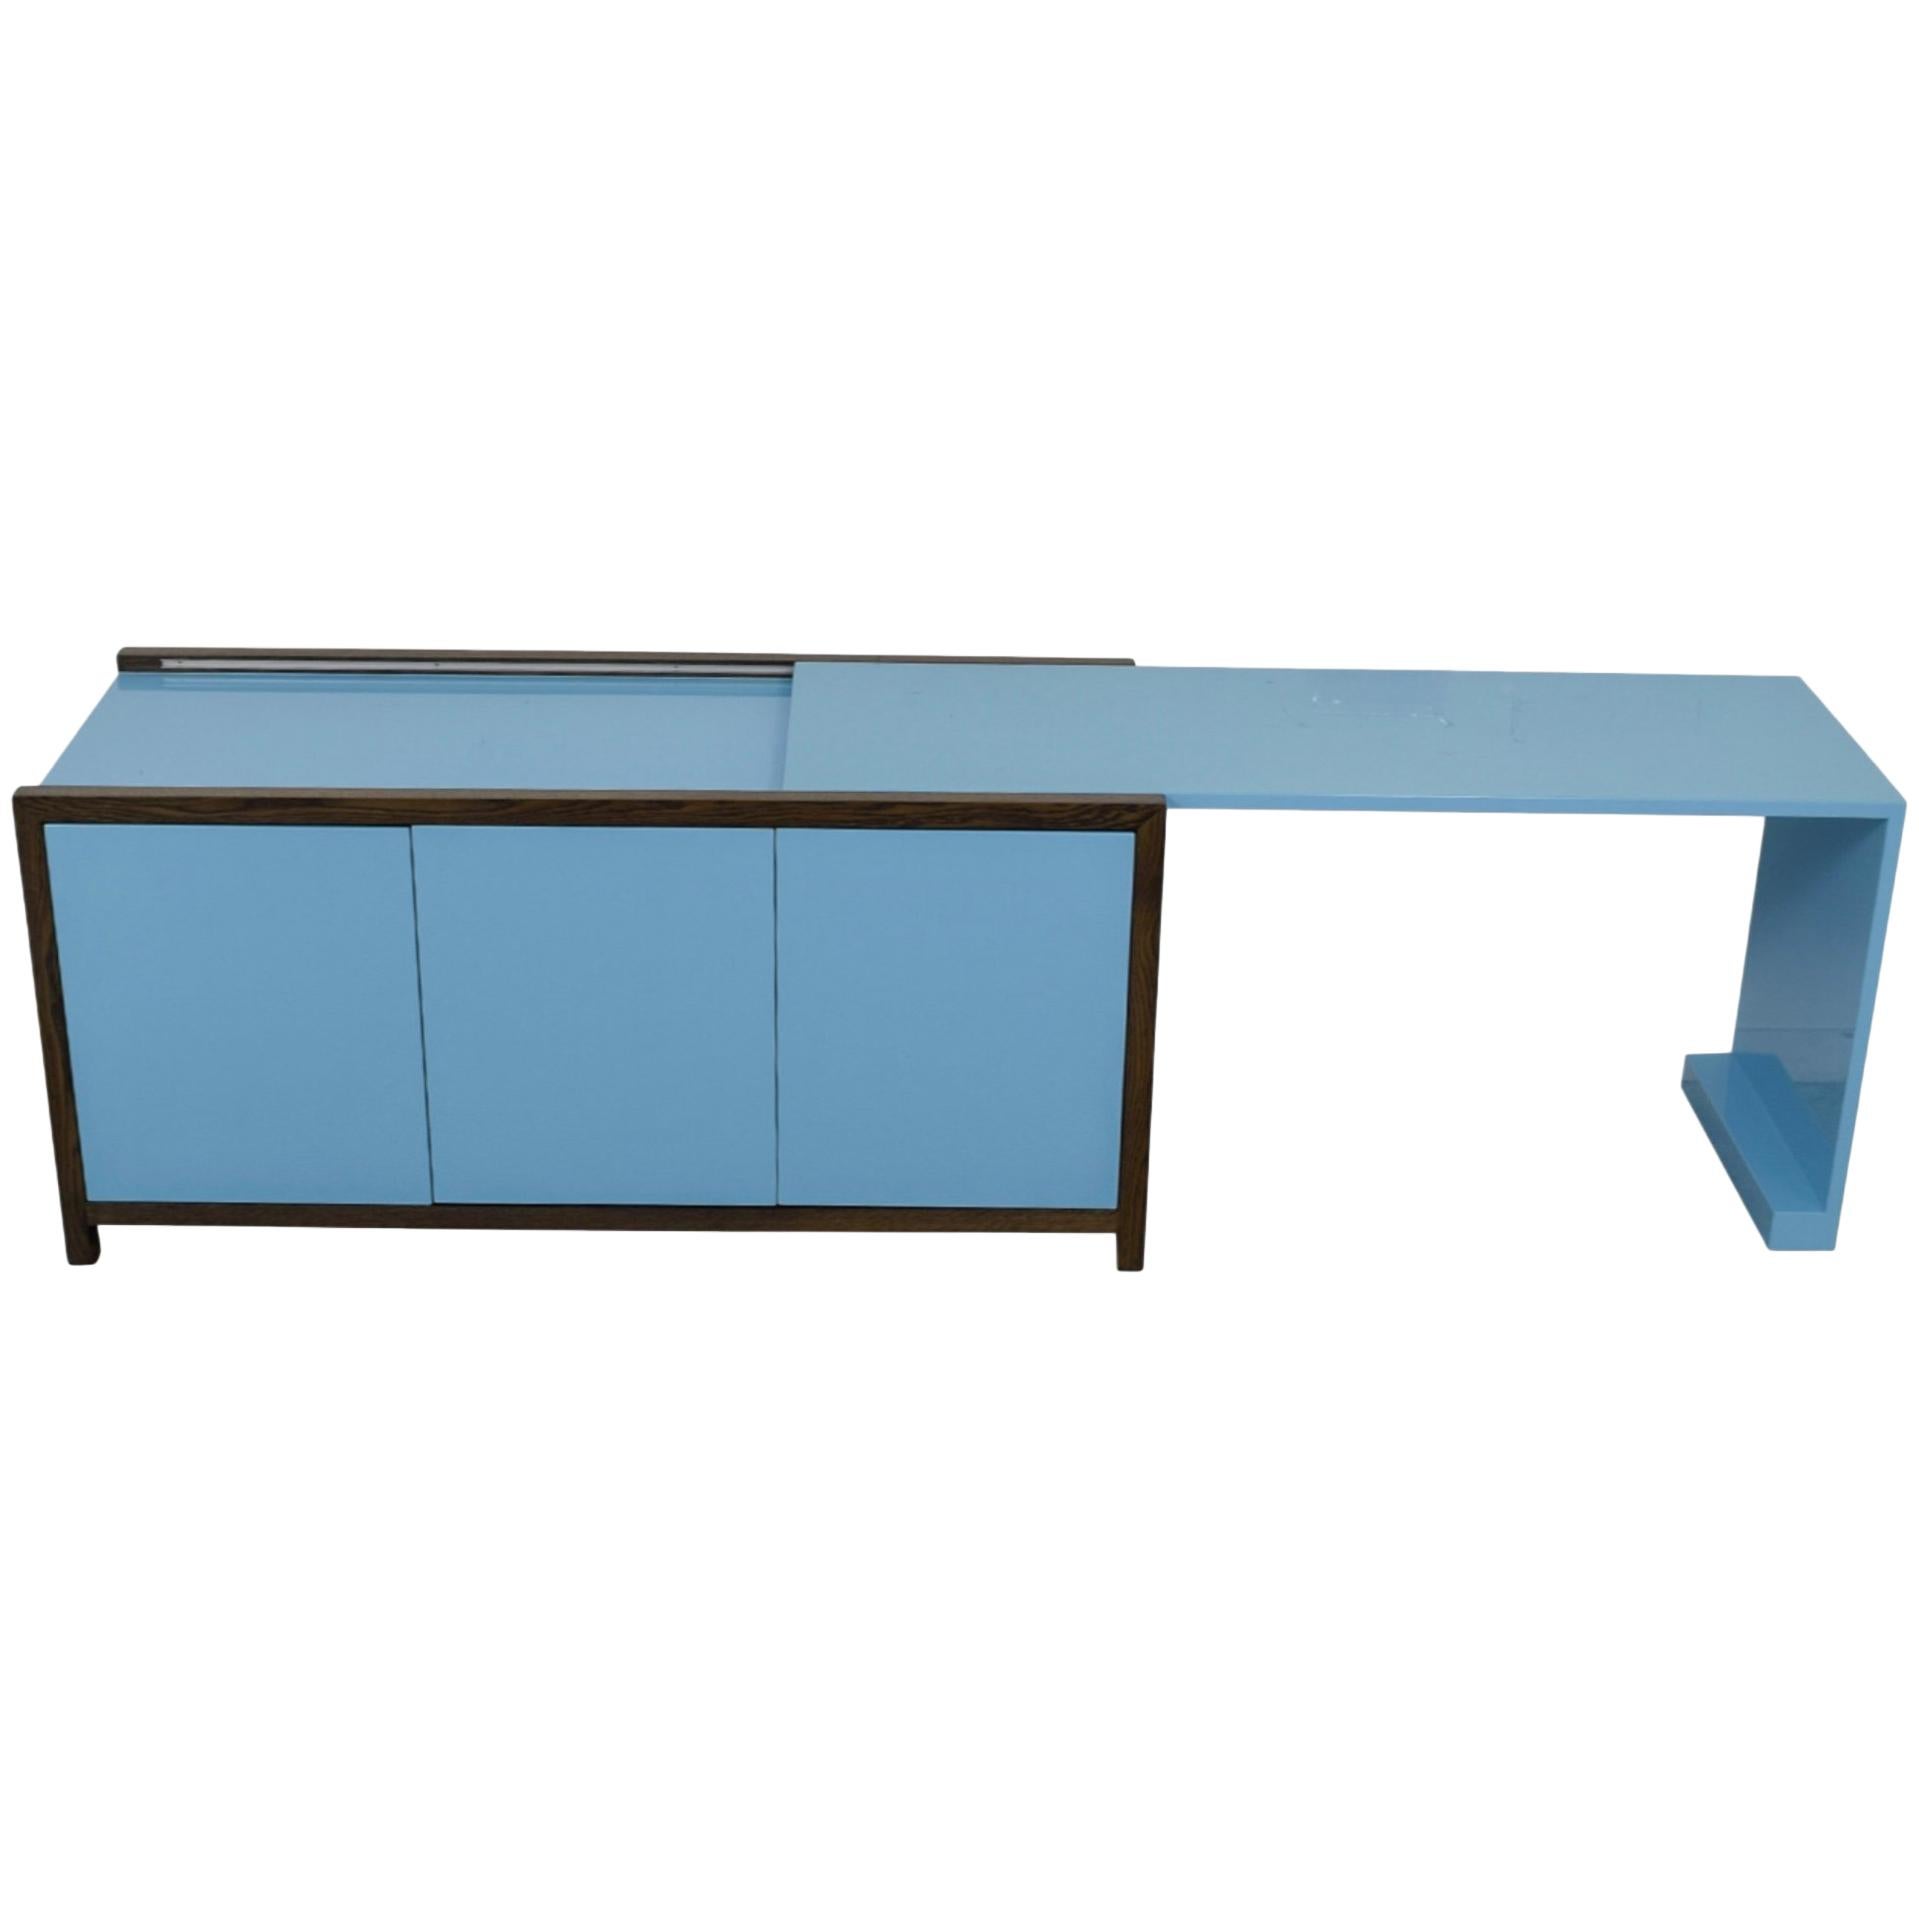 Dune New York ‘Lemans’ Sideboard Cabinet with Extendable Desk,  2000, Blue